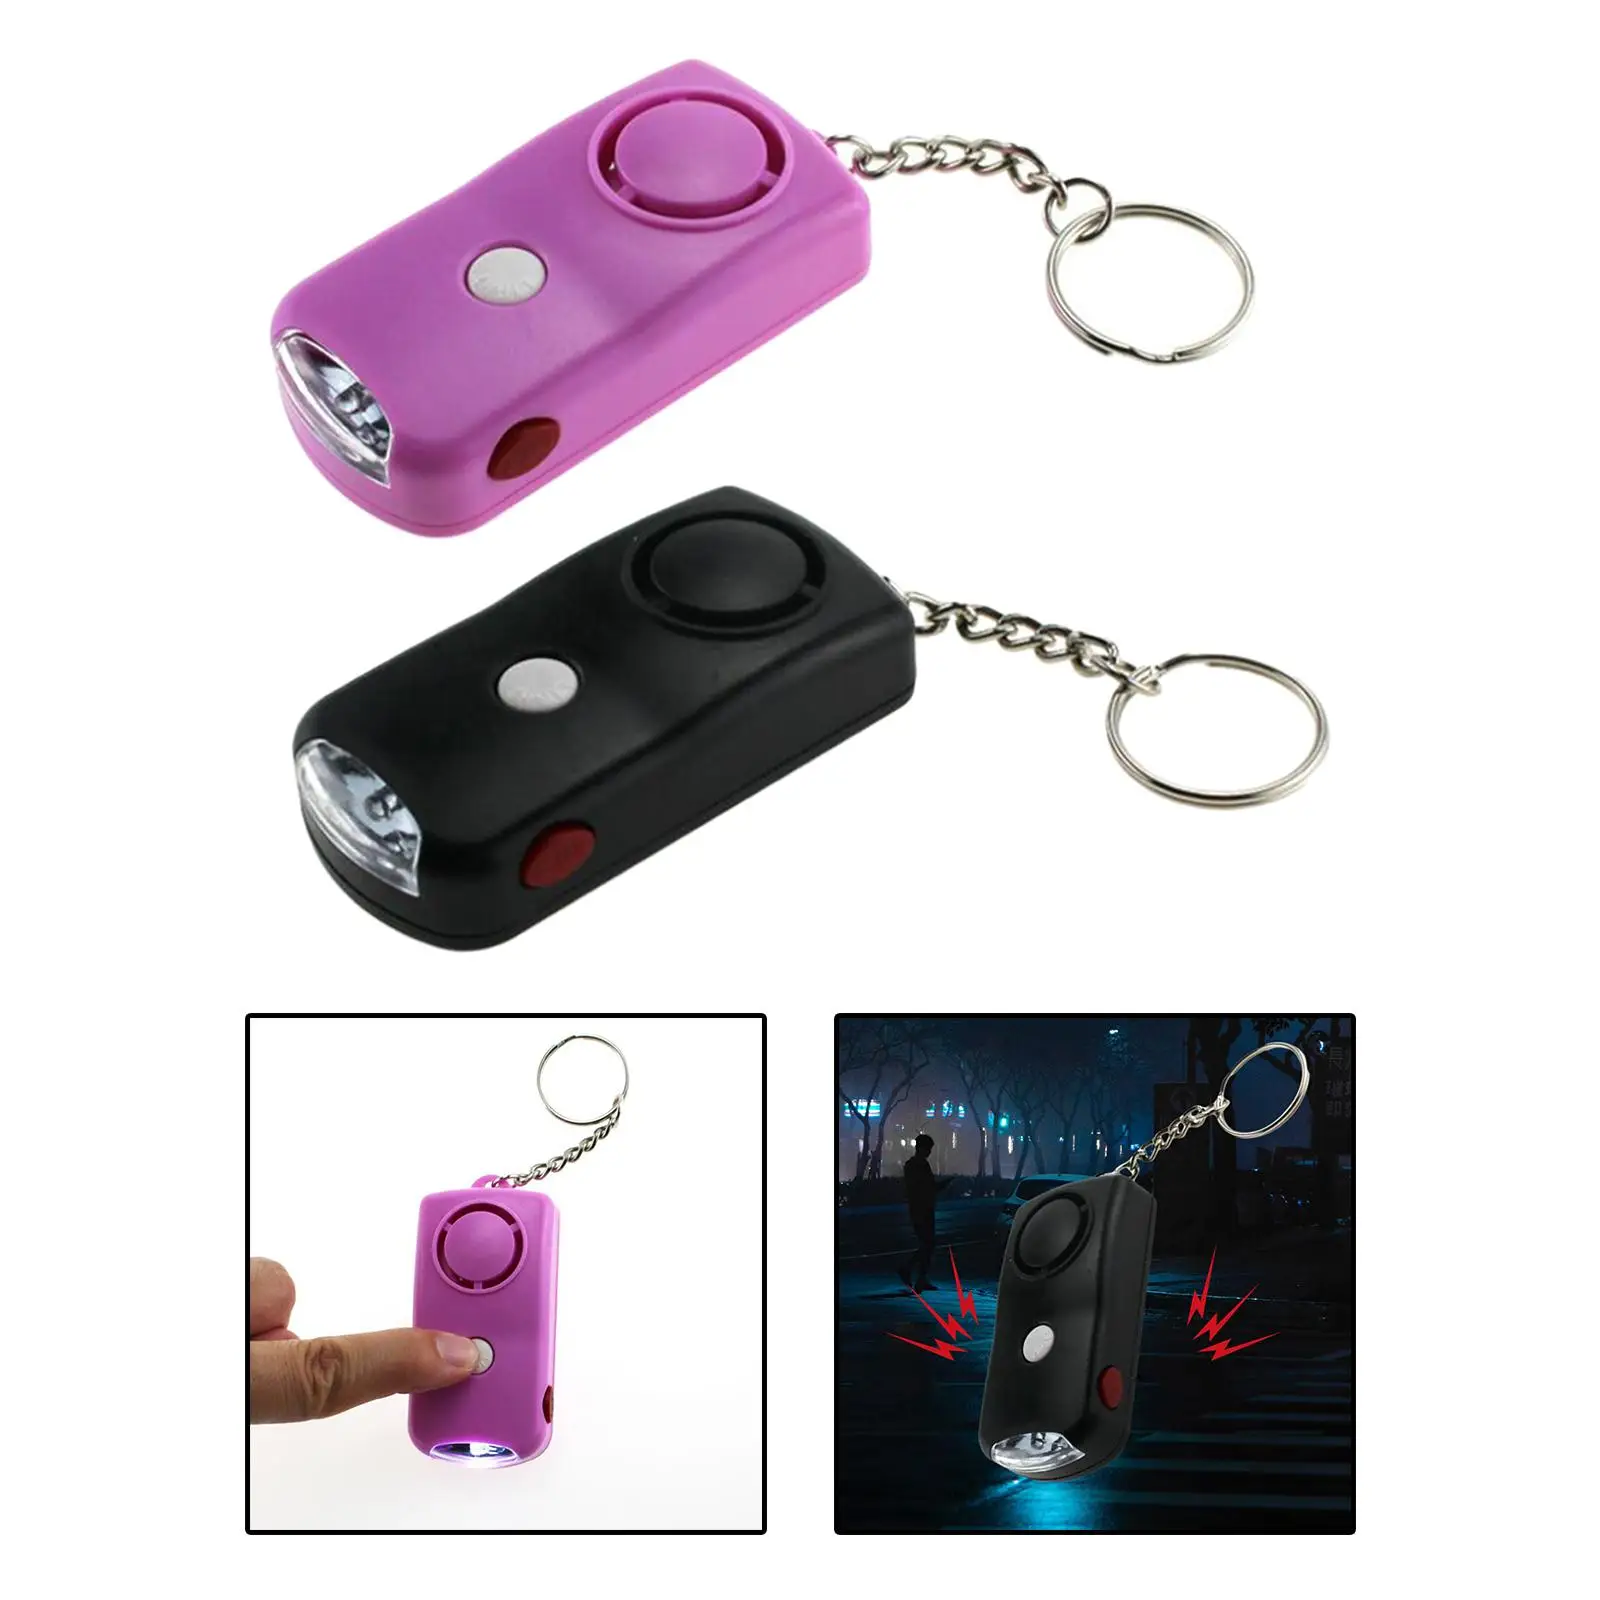 Personal Alarm Keychain Keychain Alarm Security Personal Protection Device with LED Light for Women Men Emergency LED Flashlight